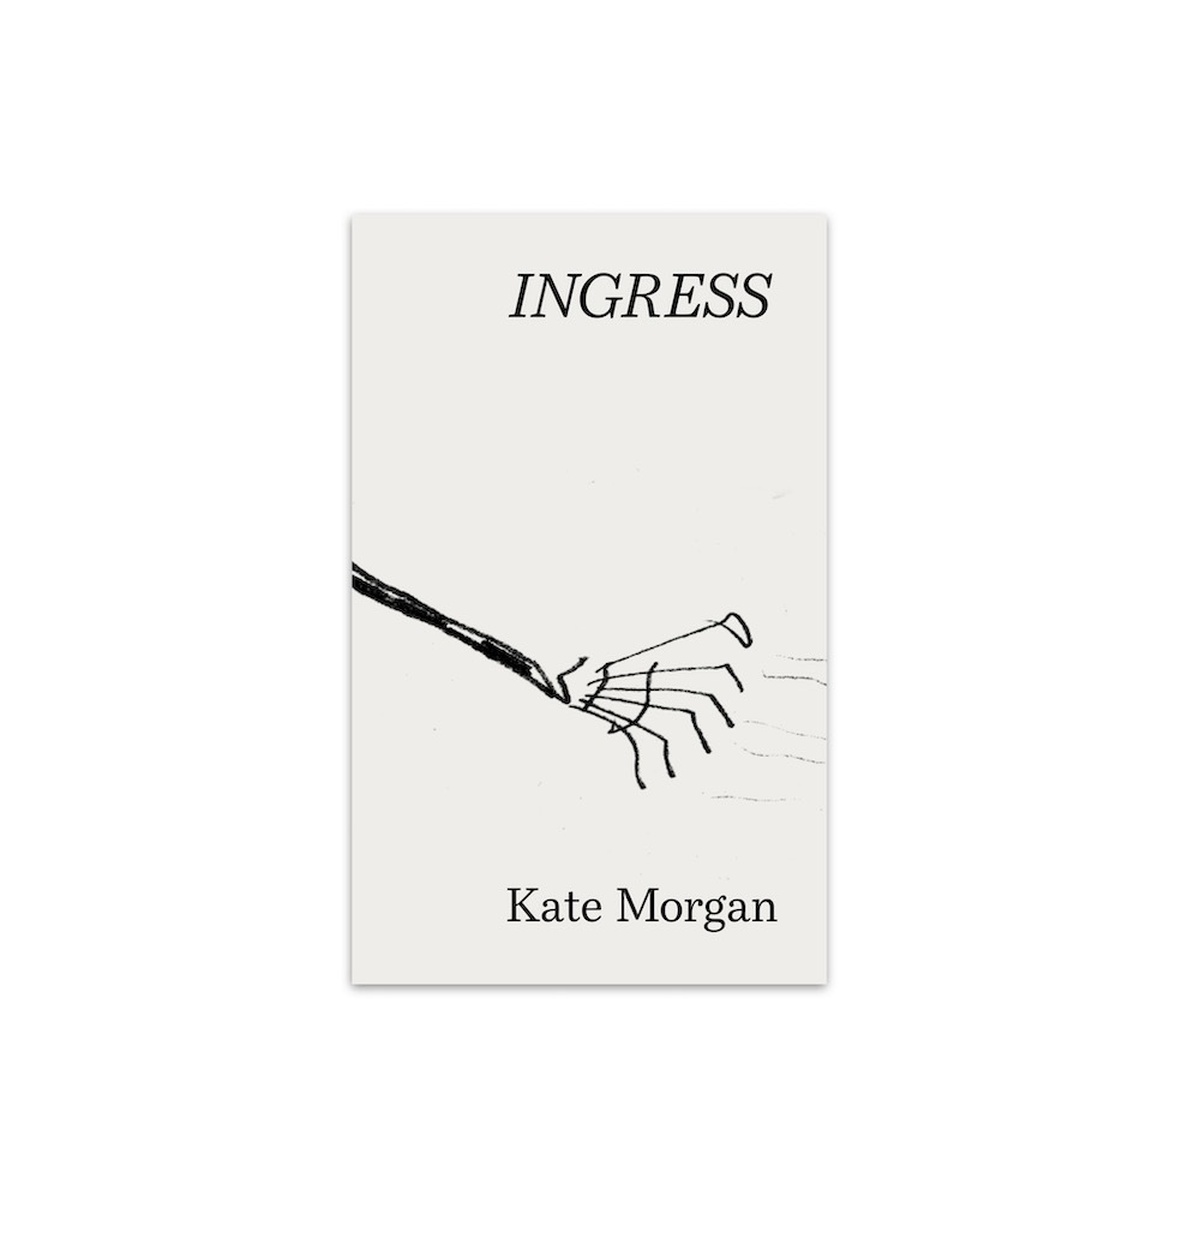 A book cover reading "Ingress Kate Morgan" with an illustrated rake in the centre.